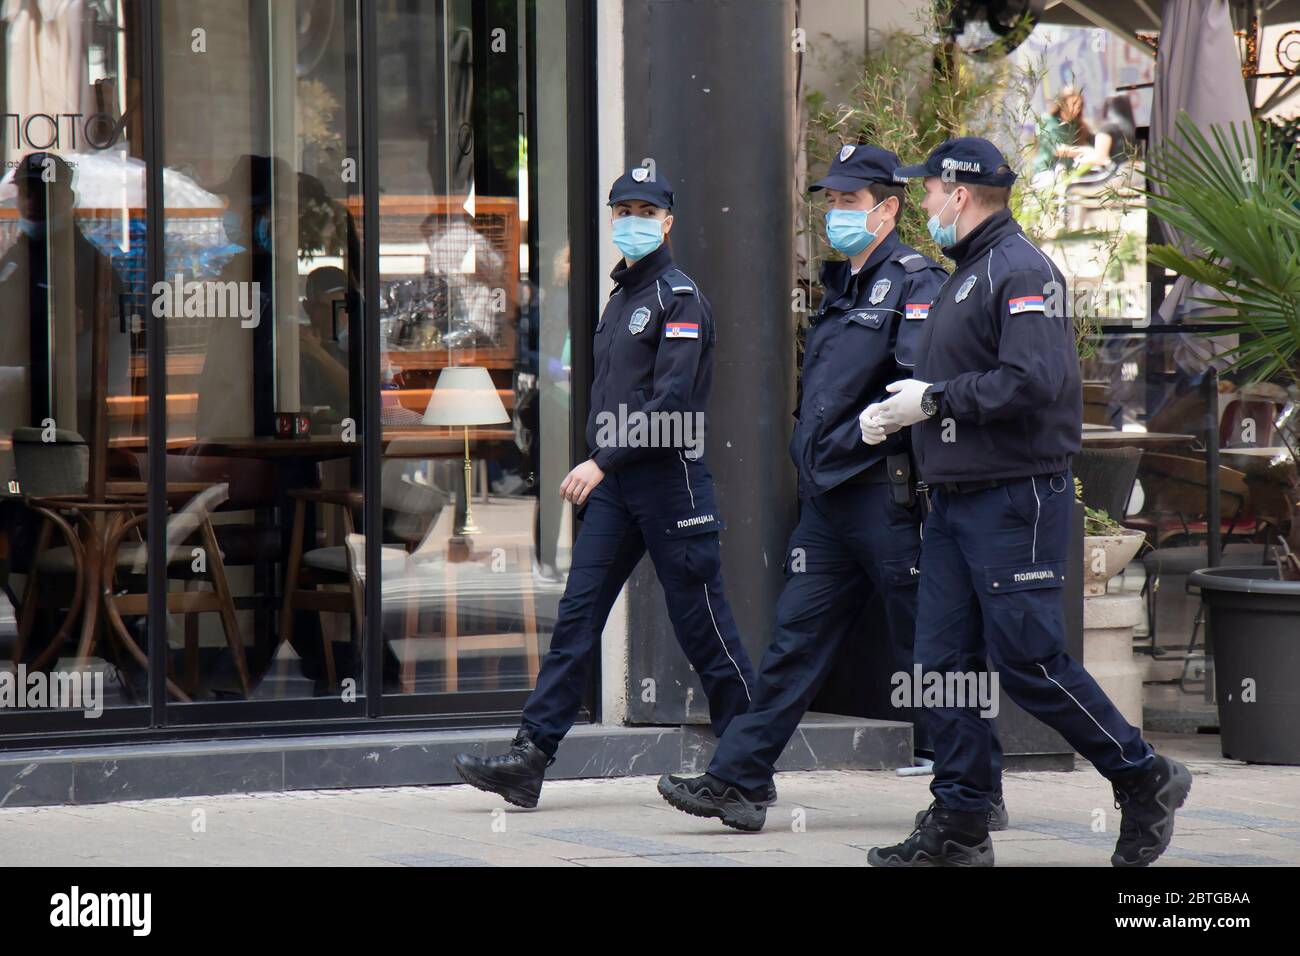 Belgrade, Serbia - May 21, 2020: Policewoman and policemen on duty, wearing surgical face masks while walking city street and talking Stock Photo